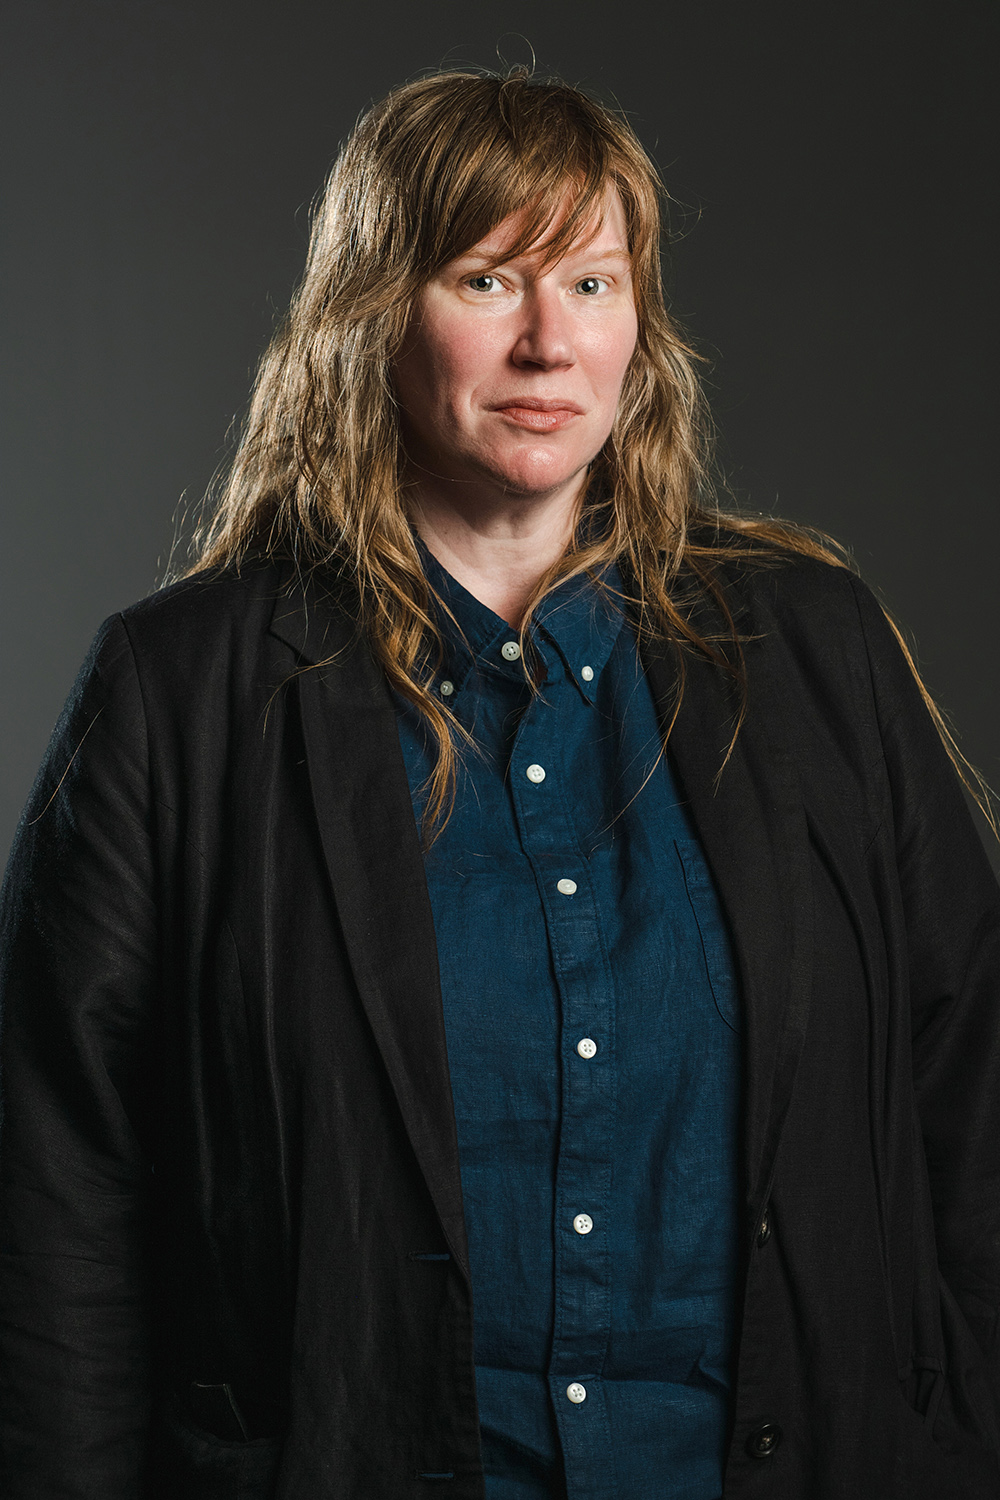 Color photograph of a light skinned woman with brown hair wearing a black blazer over an indigo shirt; she looks at the camera with a serious expression